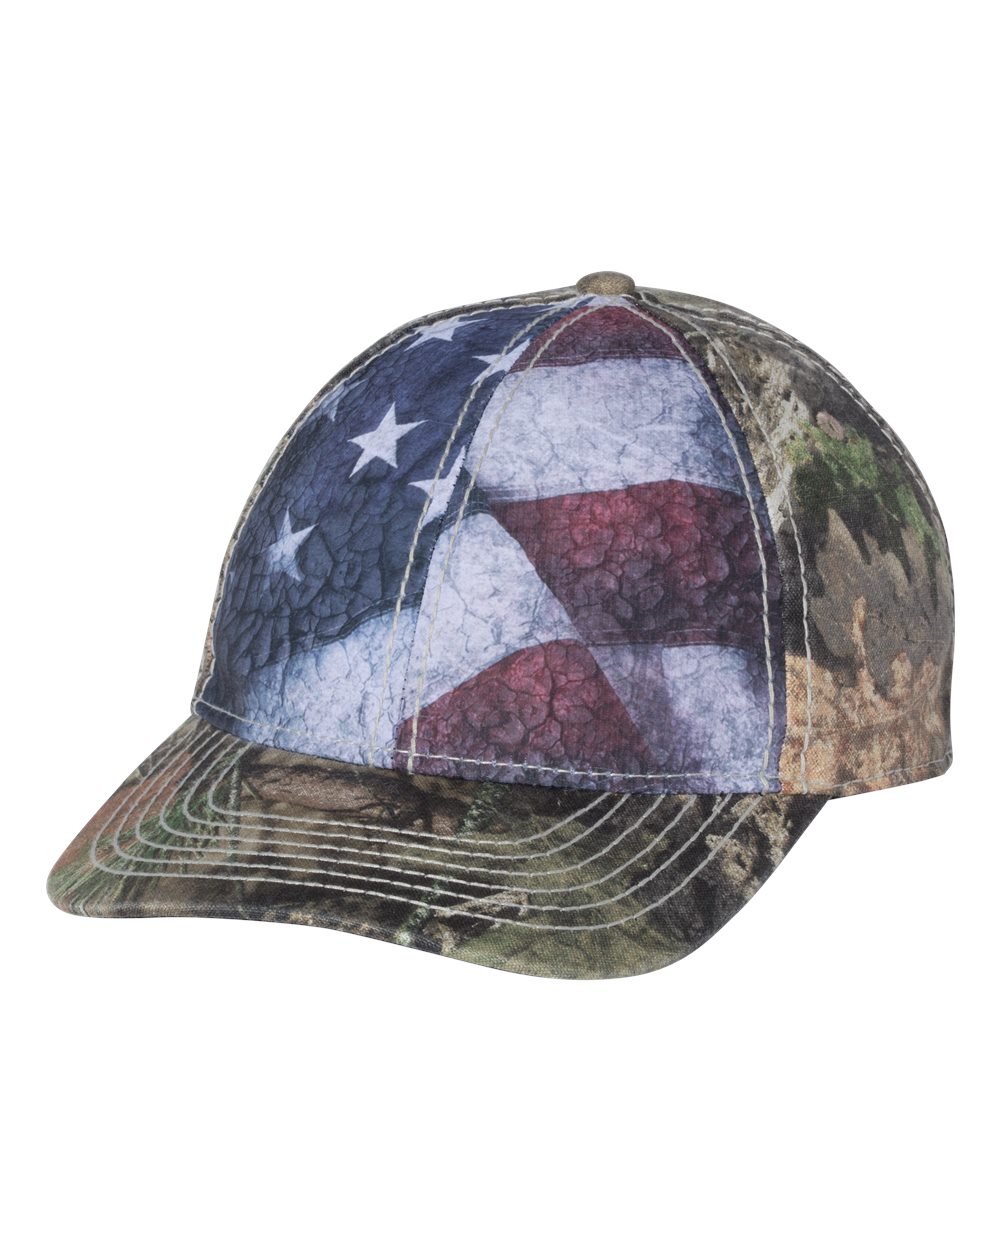 Outdoor Cap SUS100 - Camo Cap with Flag Sublimated Front Panels